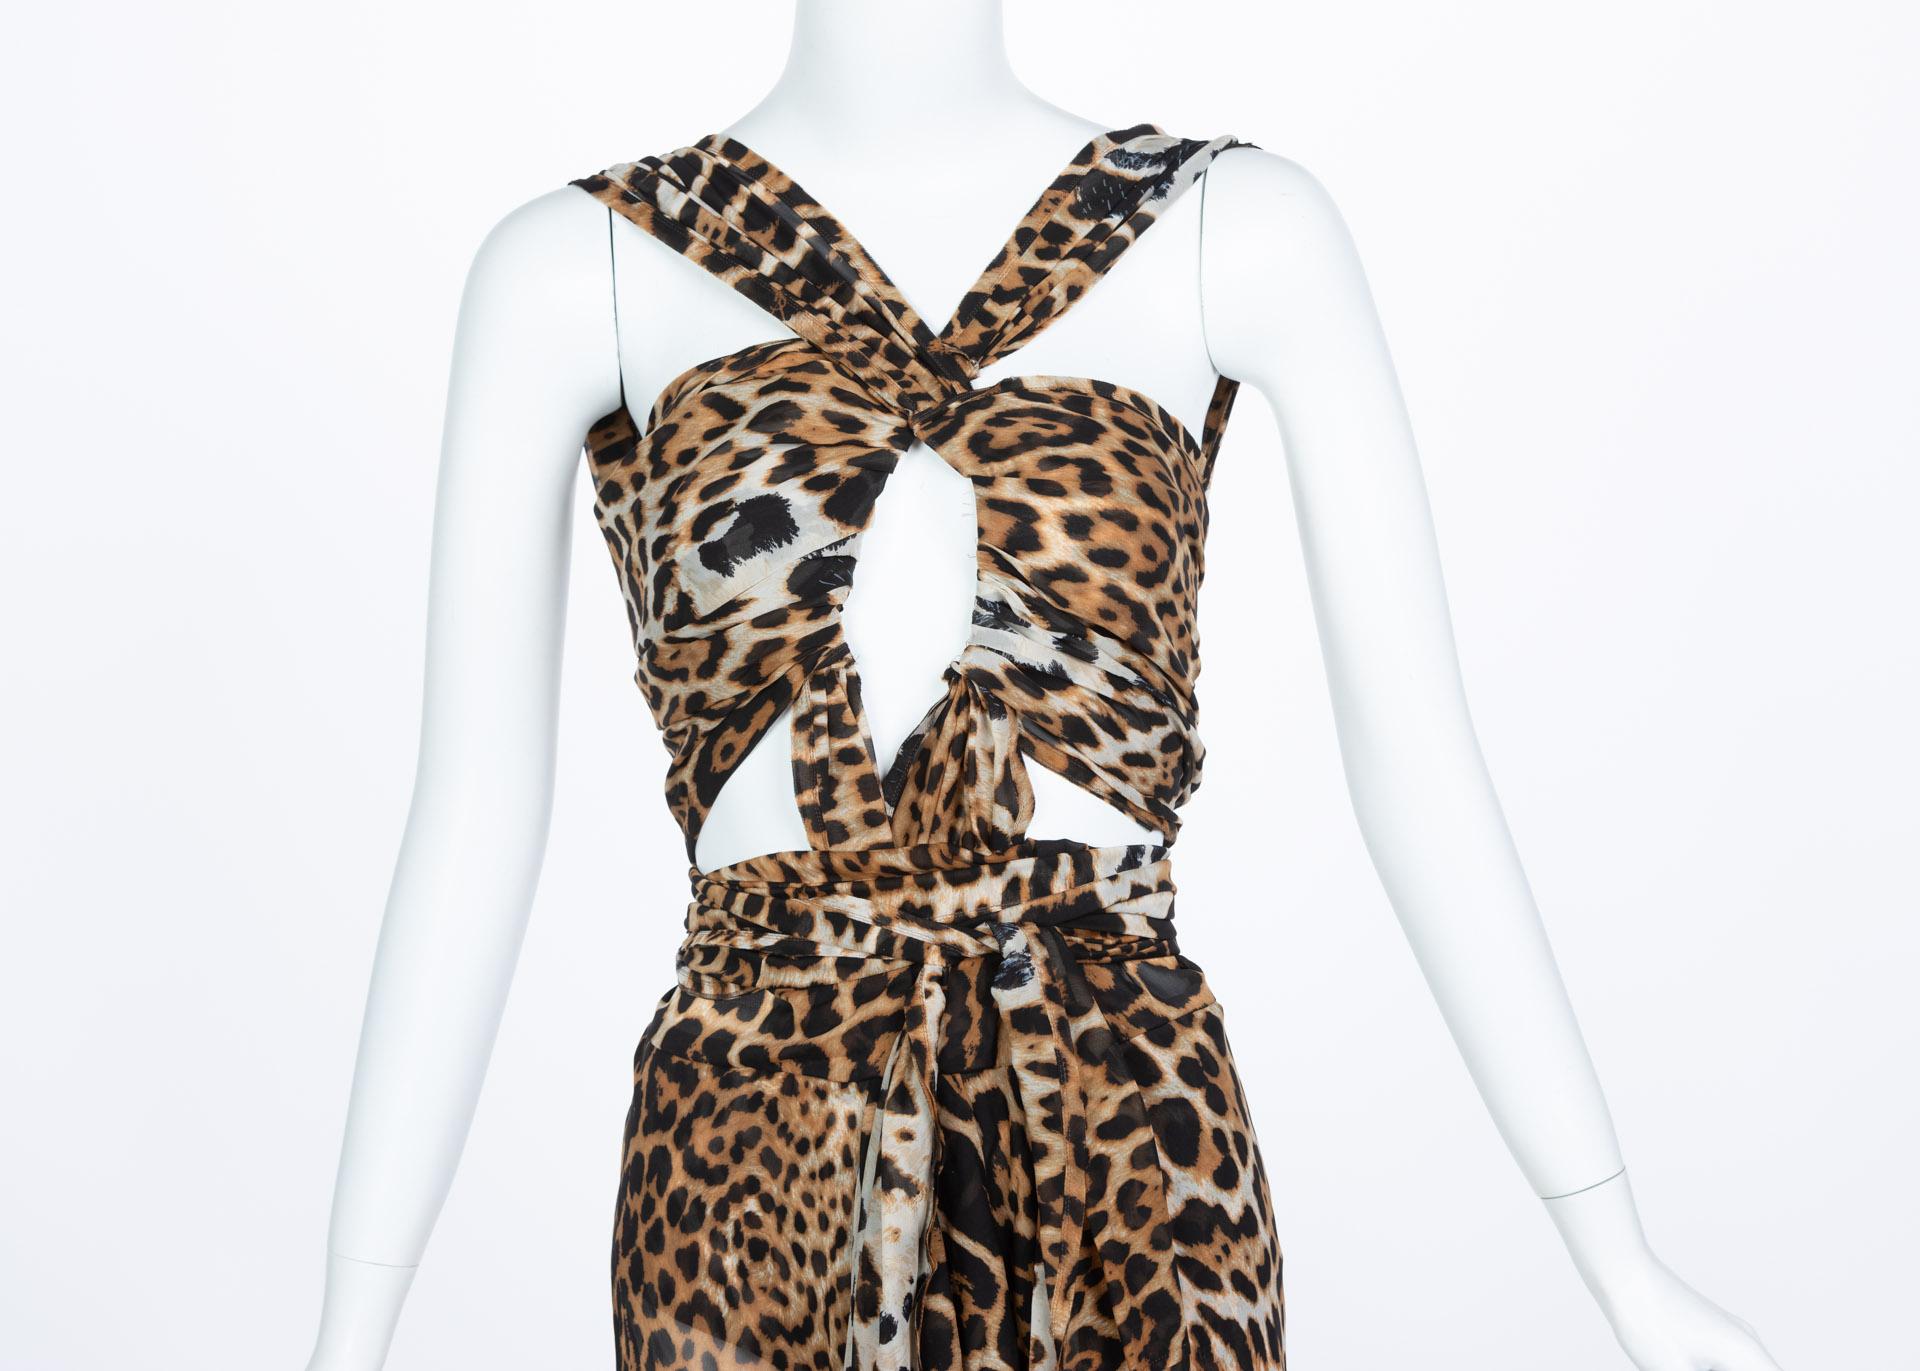  Yves Saint Laurent by Tom Ford Silk Leopard Cut Out Maxi Dress YSL, 2002  2